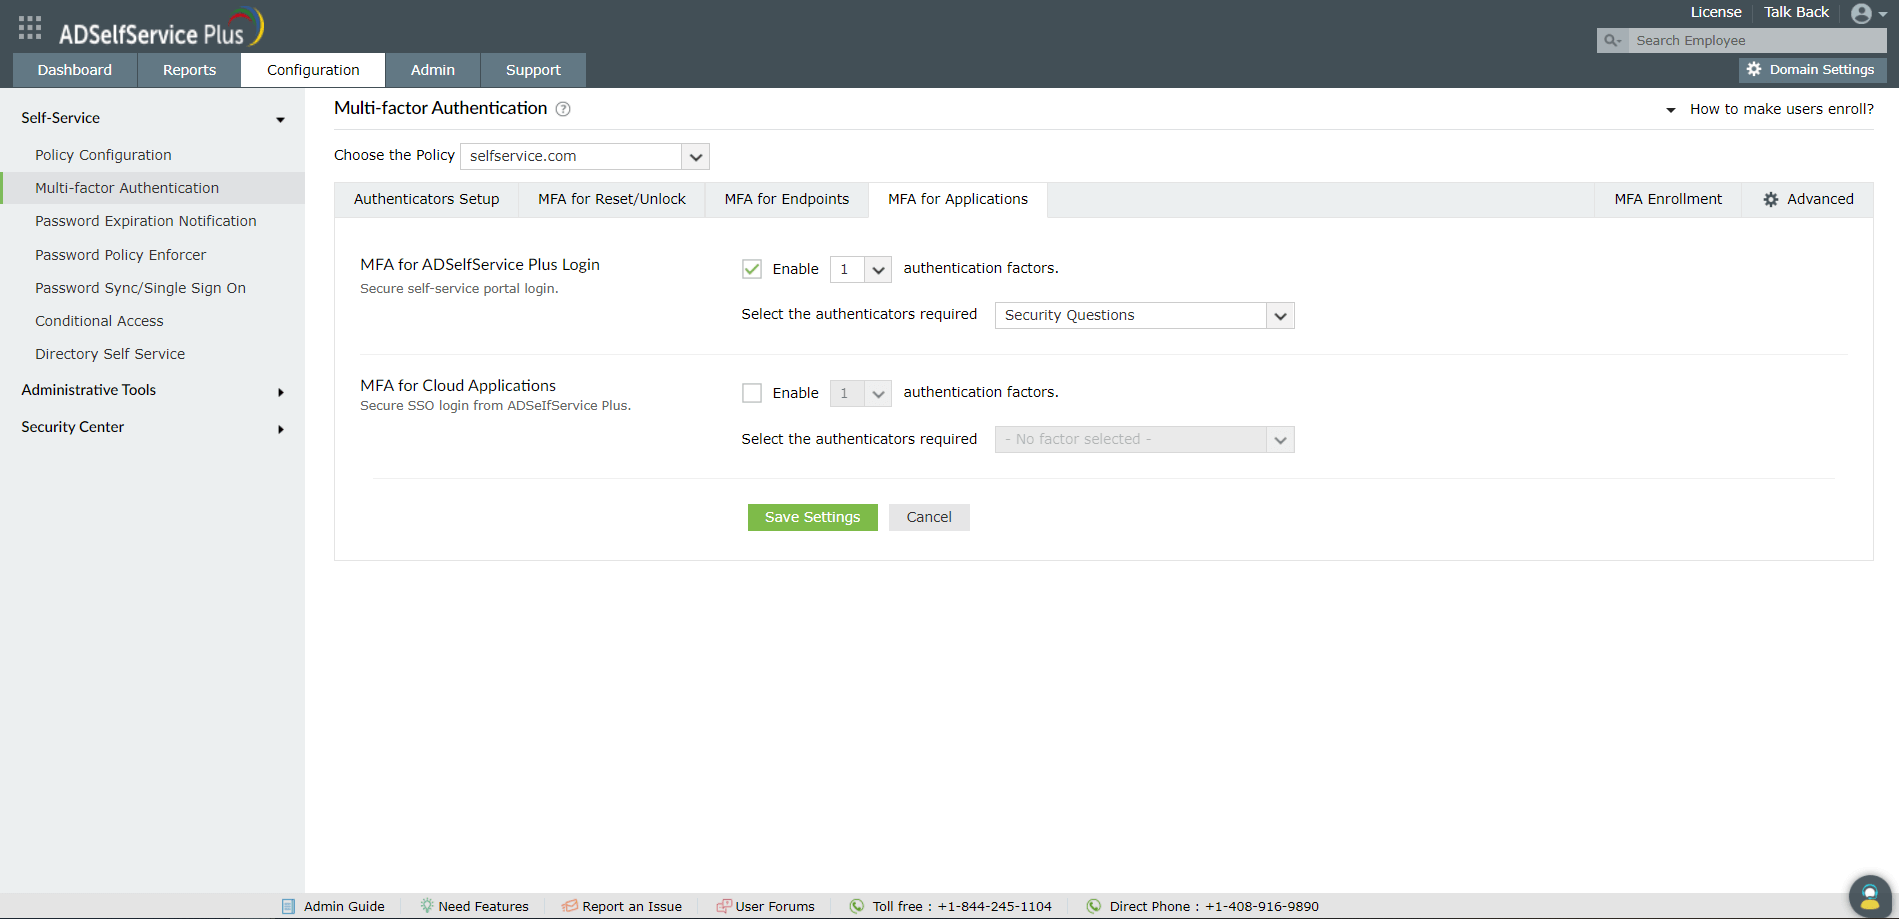 Steps to enable MFA for ADSelfService Plus